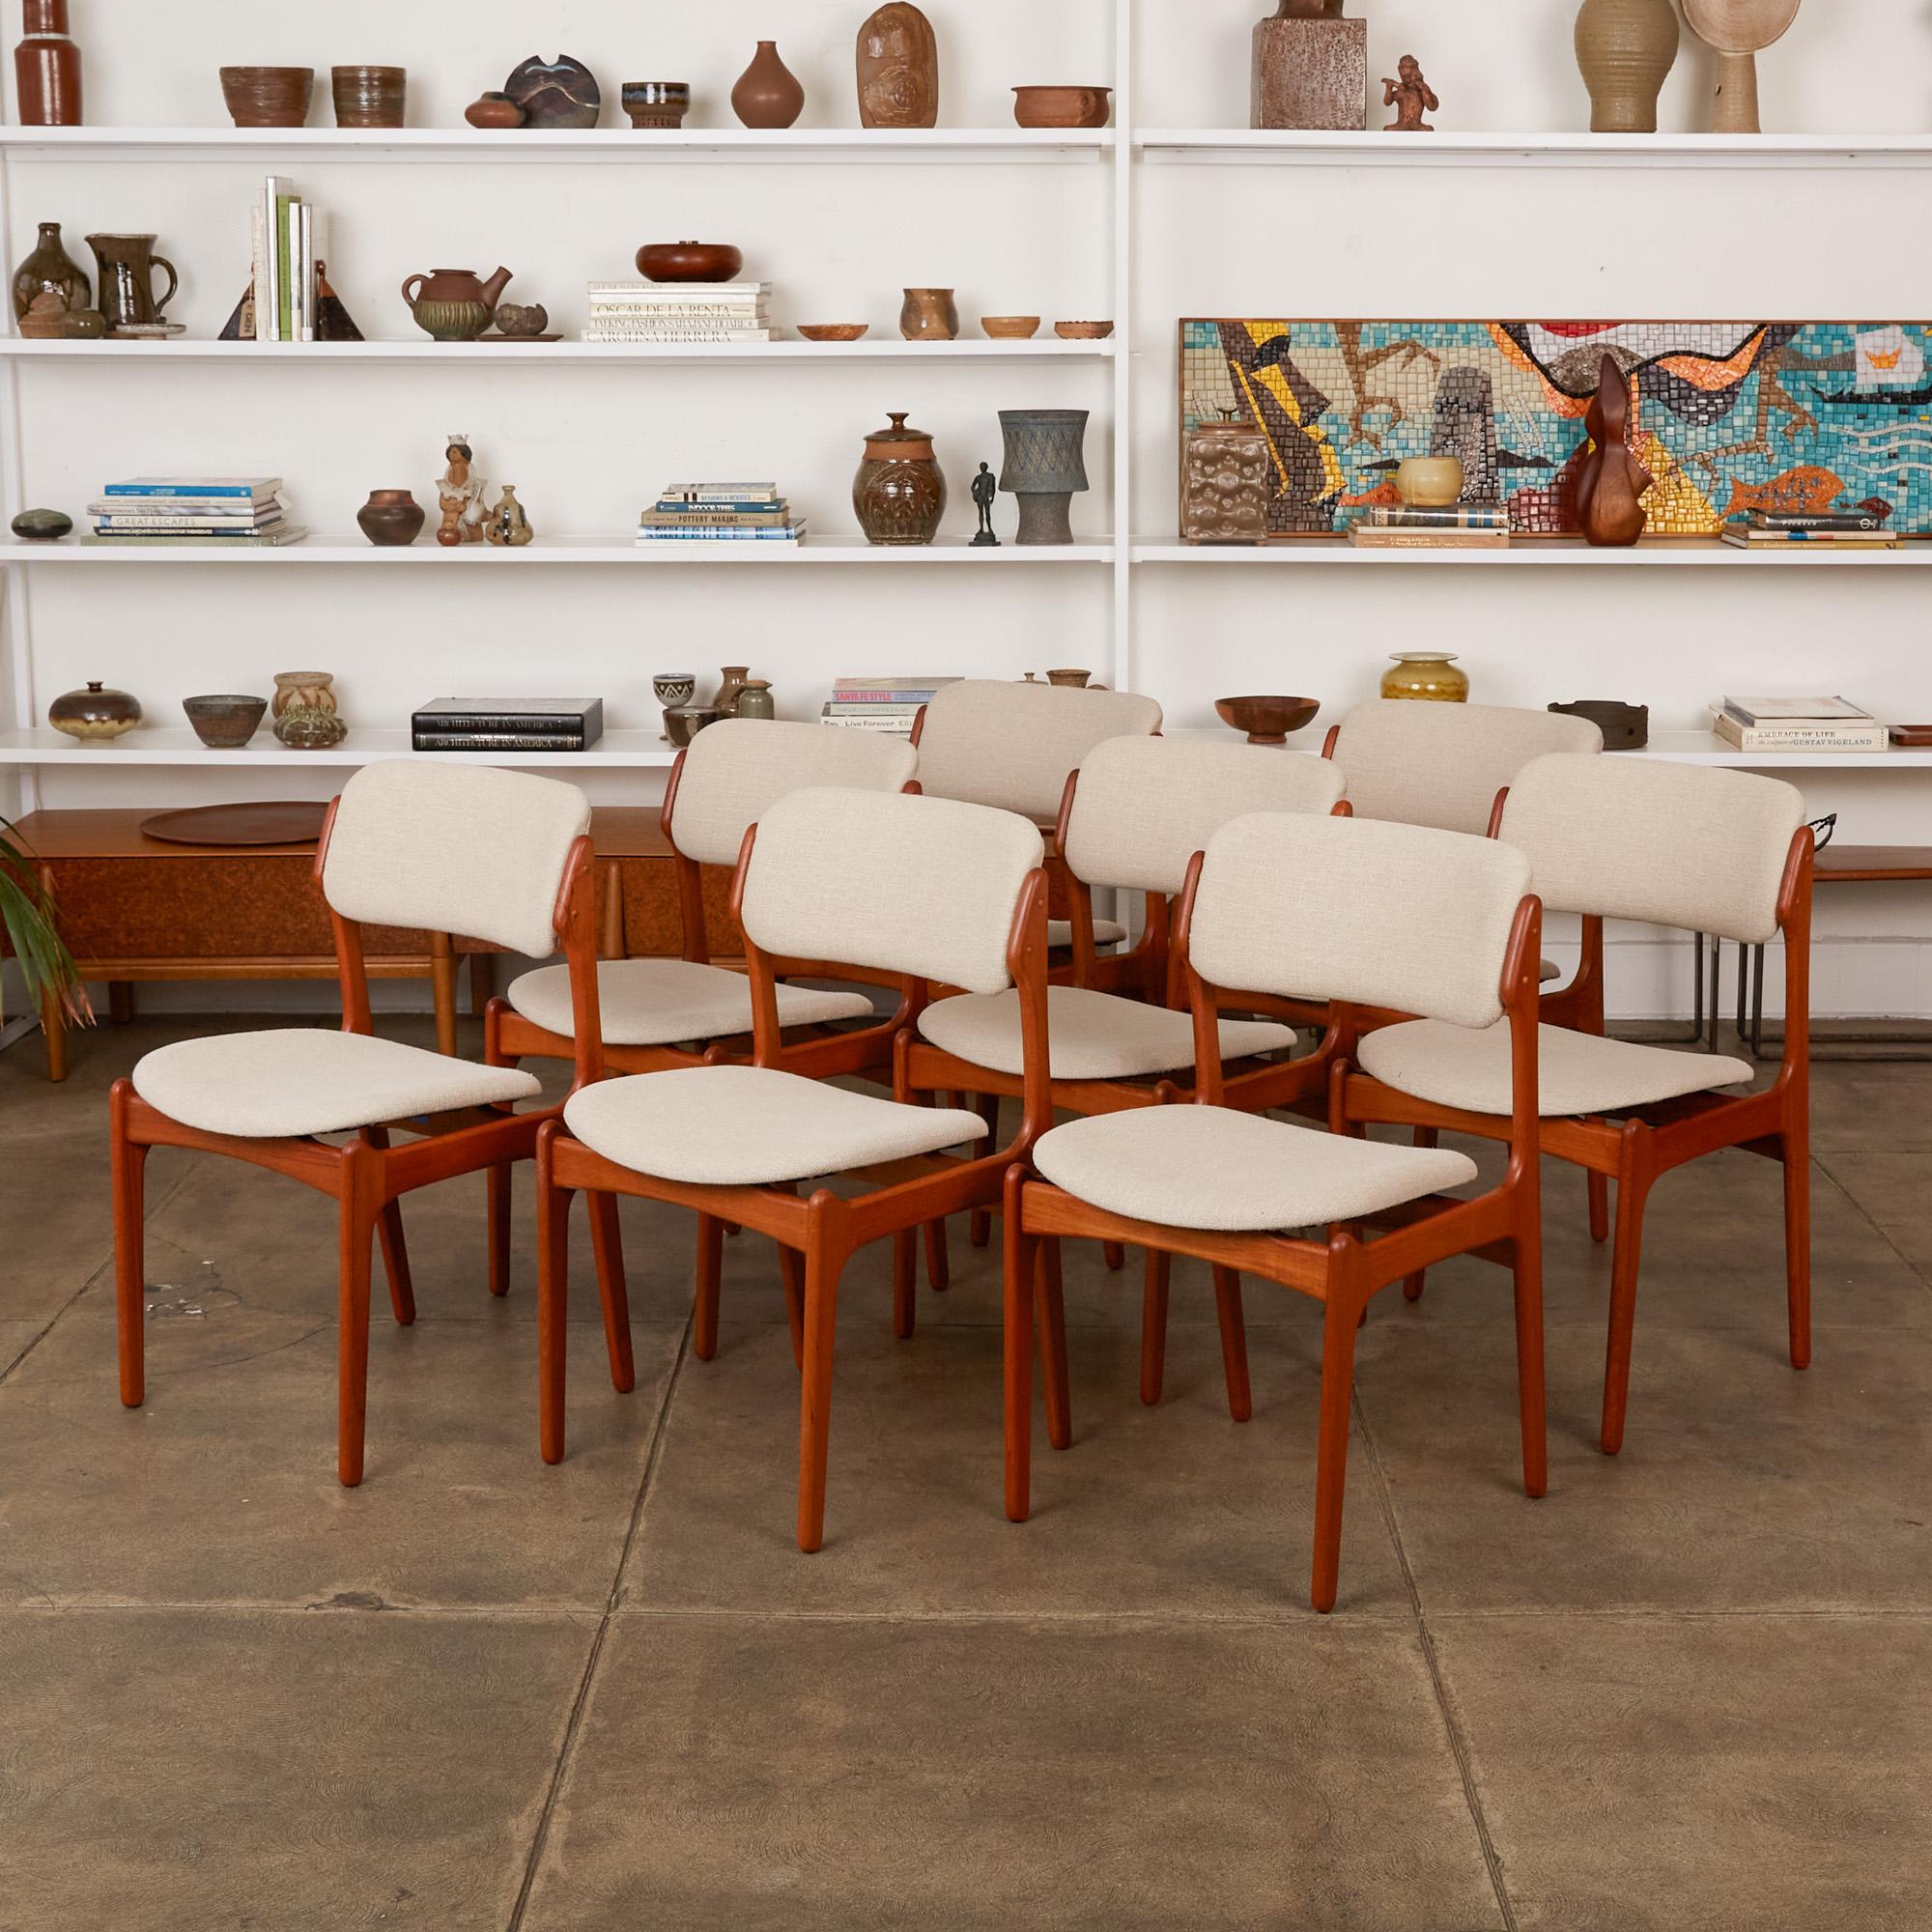 Set of 8 teak dining chairs by Erik Buch for Odense Maskinsnedkeri, Denmark, circa 1956. The set of model 49 dining chairs features two armchairs with sculptured armrests and six side chairs in oiled teak with new oatmeal colored Belgian linen